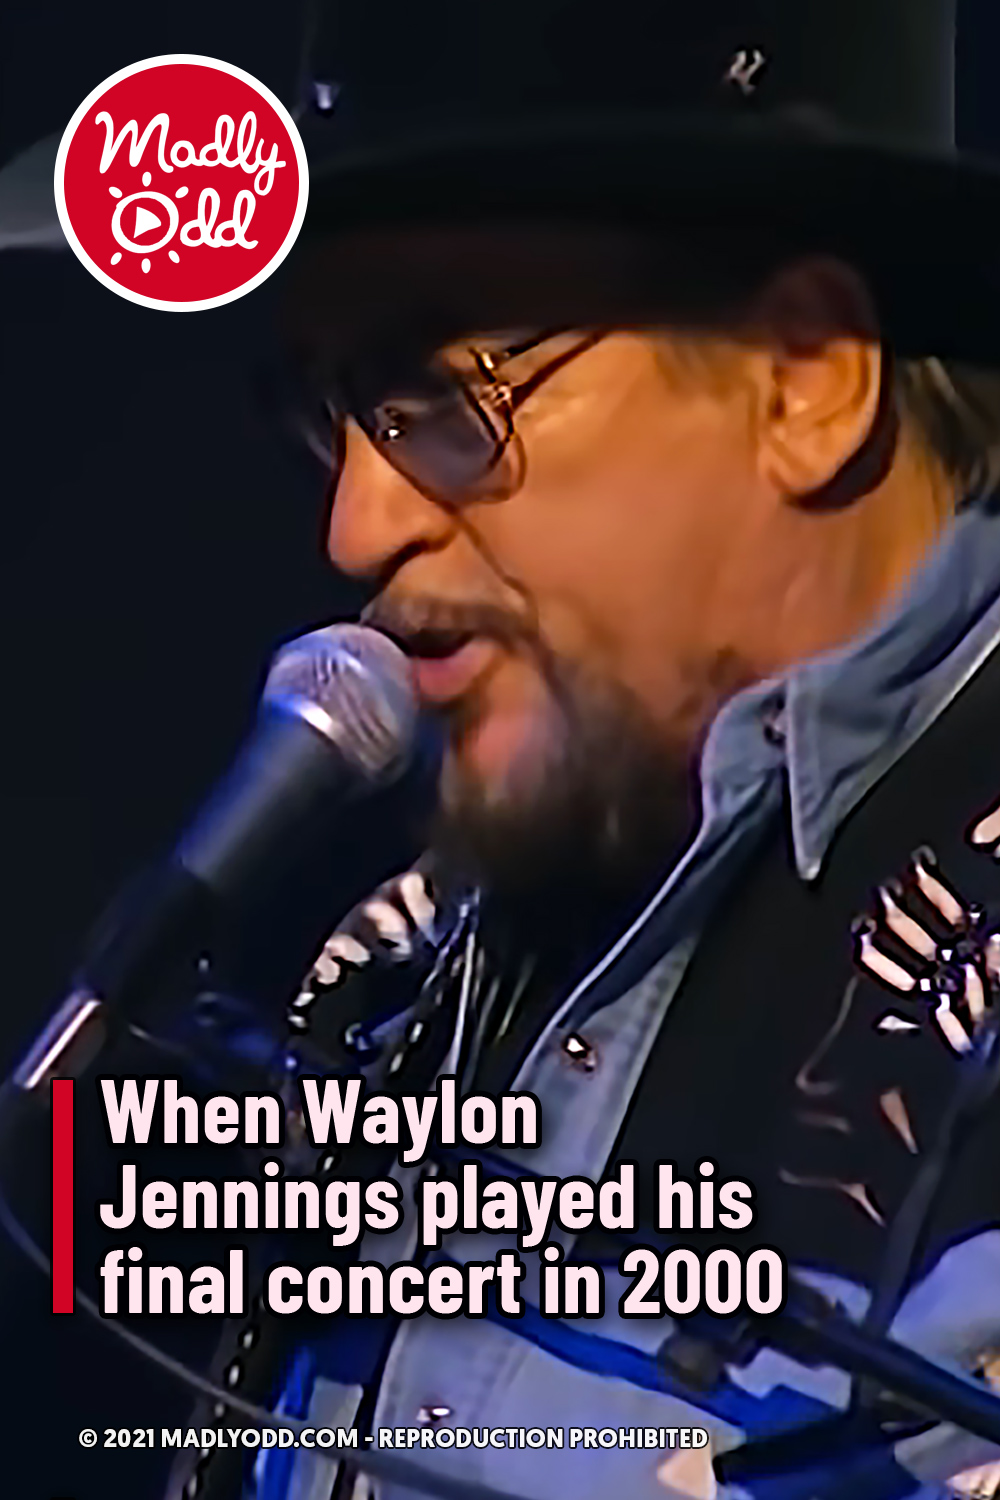 When Waylon Jennings played his final concert in 2000